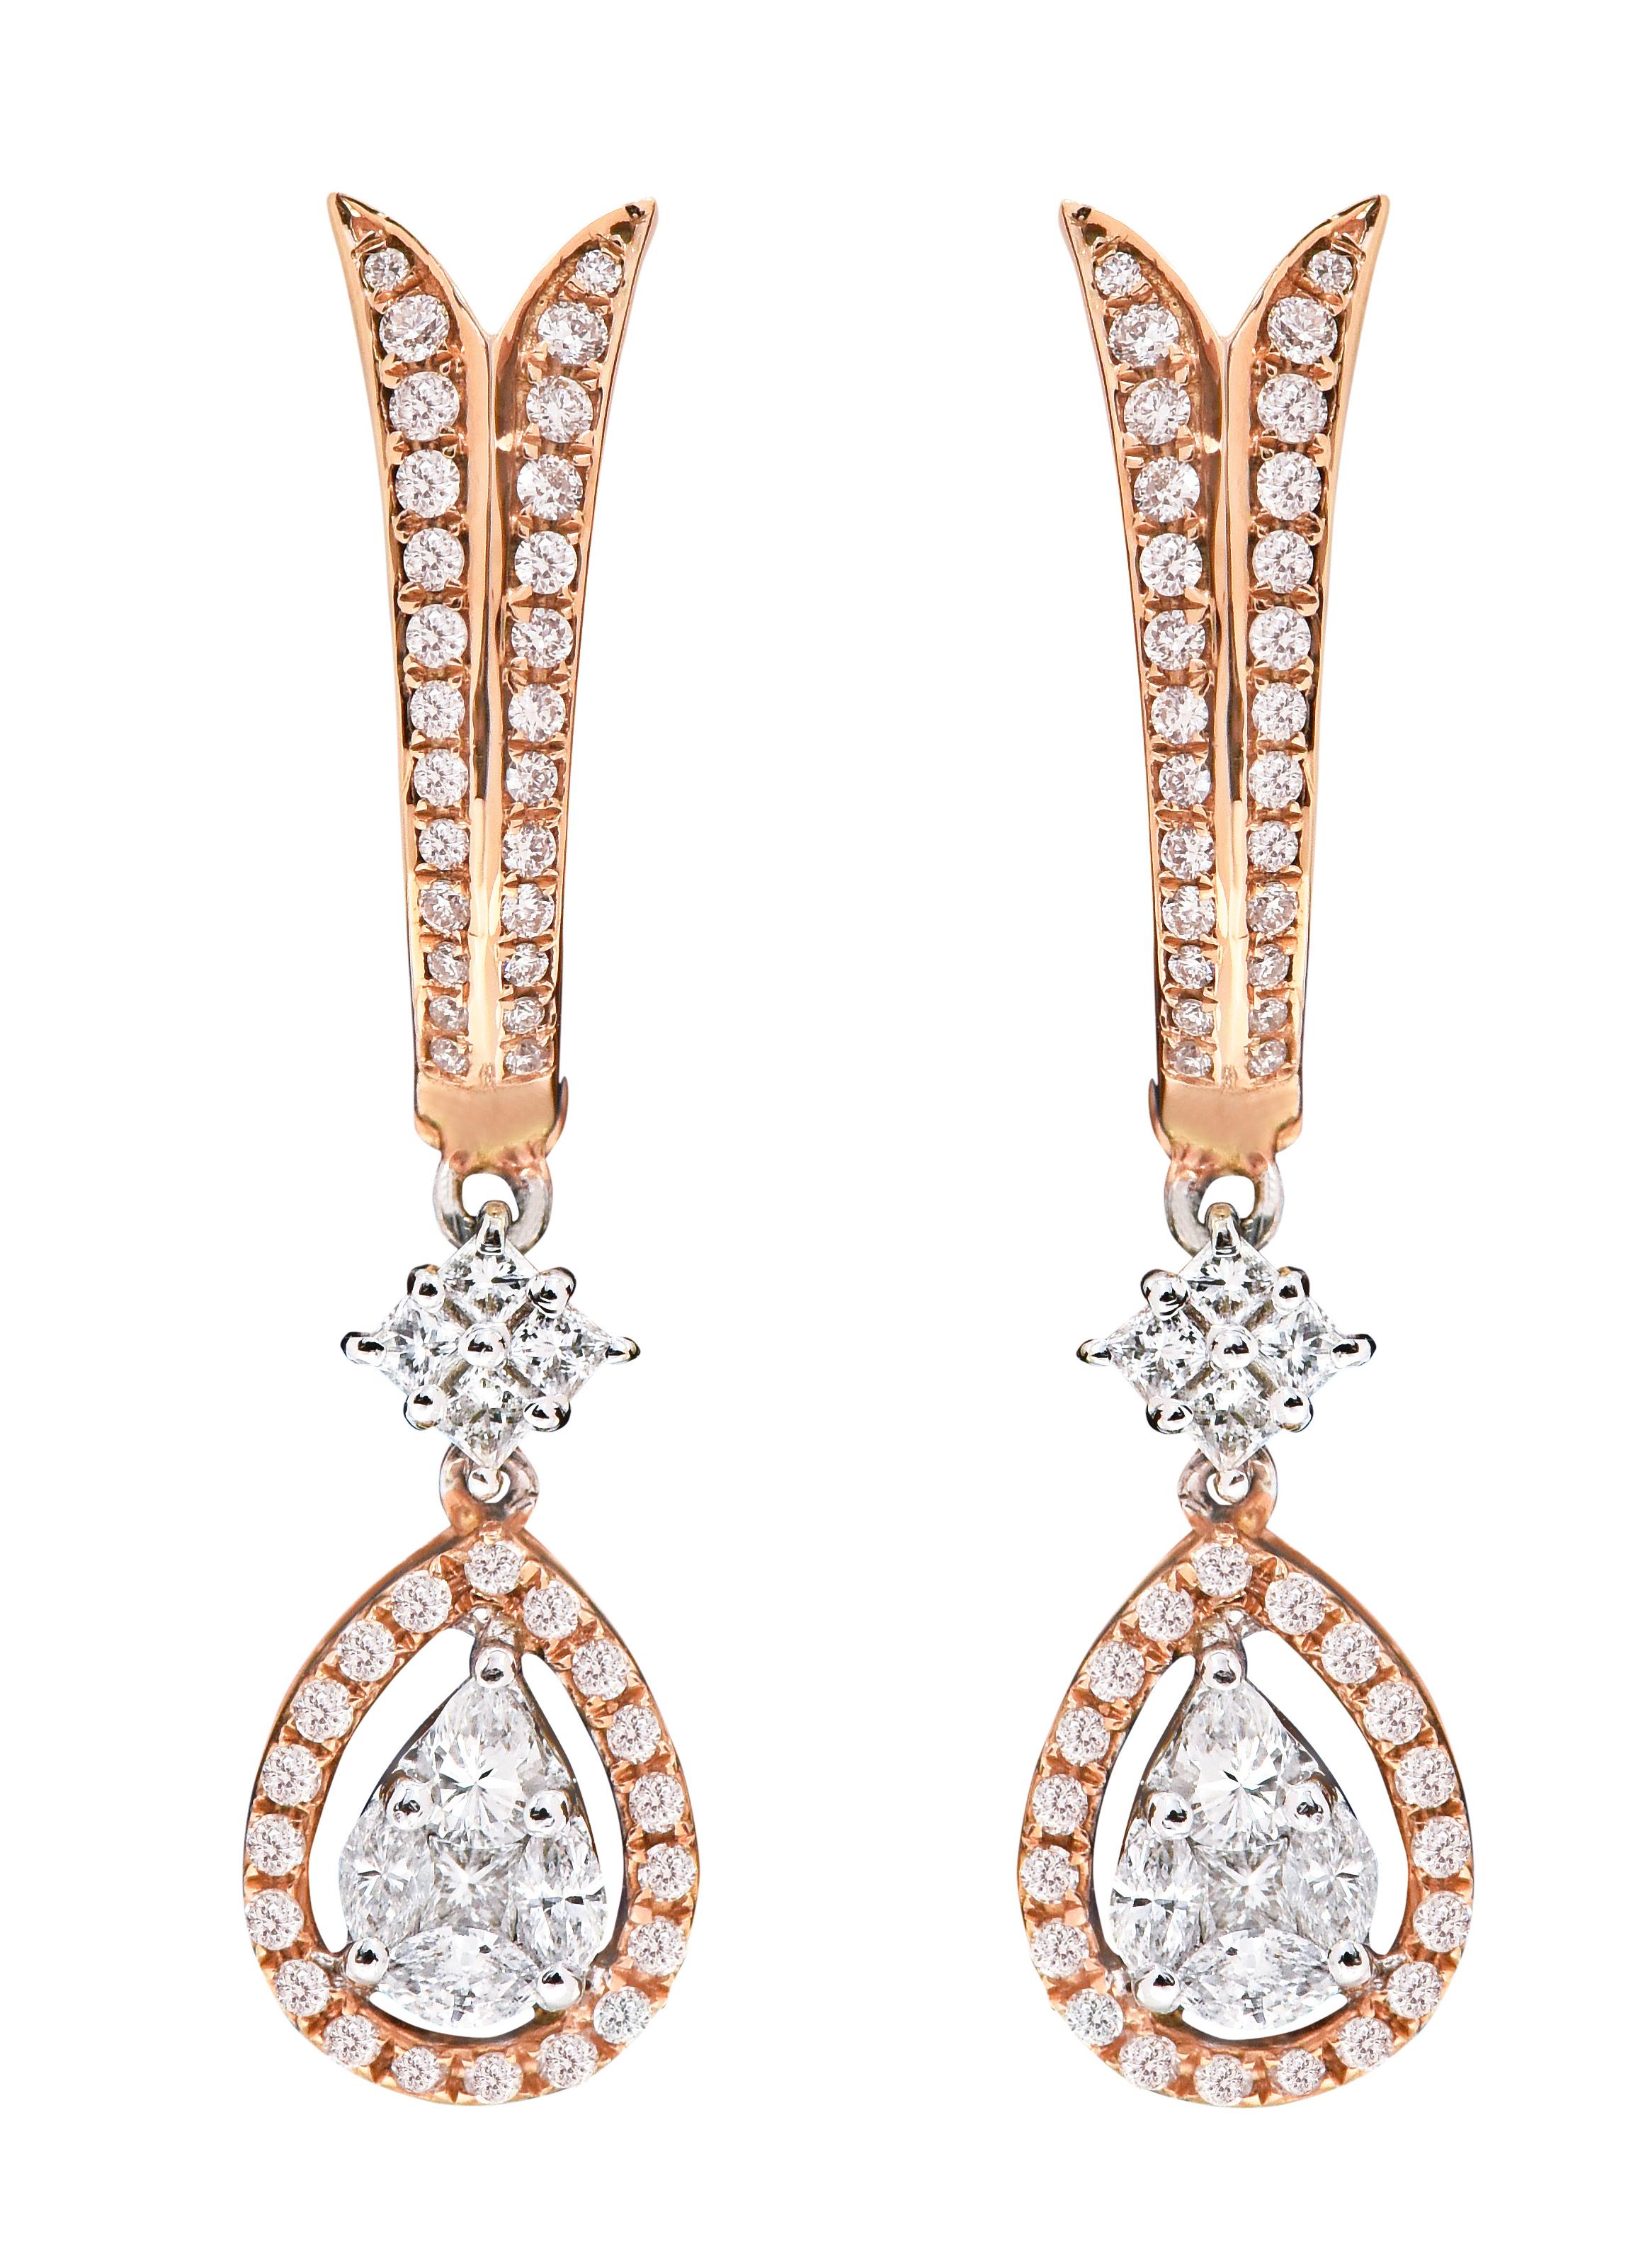 18 Karat Gold 0.79 Carat Diamond Pear Drop Earrings

This ingenious invisible pear set diamond earring is fabulous. The invisible set diamond pear drop in solid rose gold is an elegant design wherein 4 solitaire marquise on the sides and 1 square